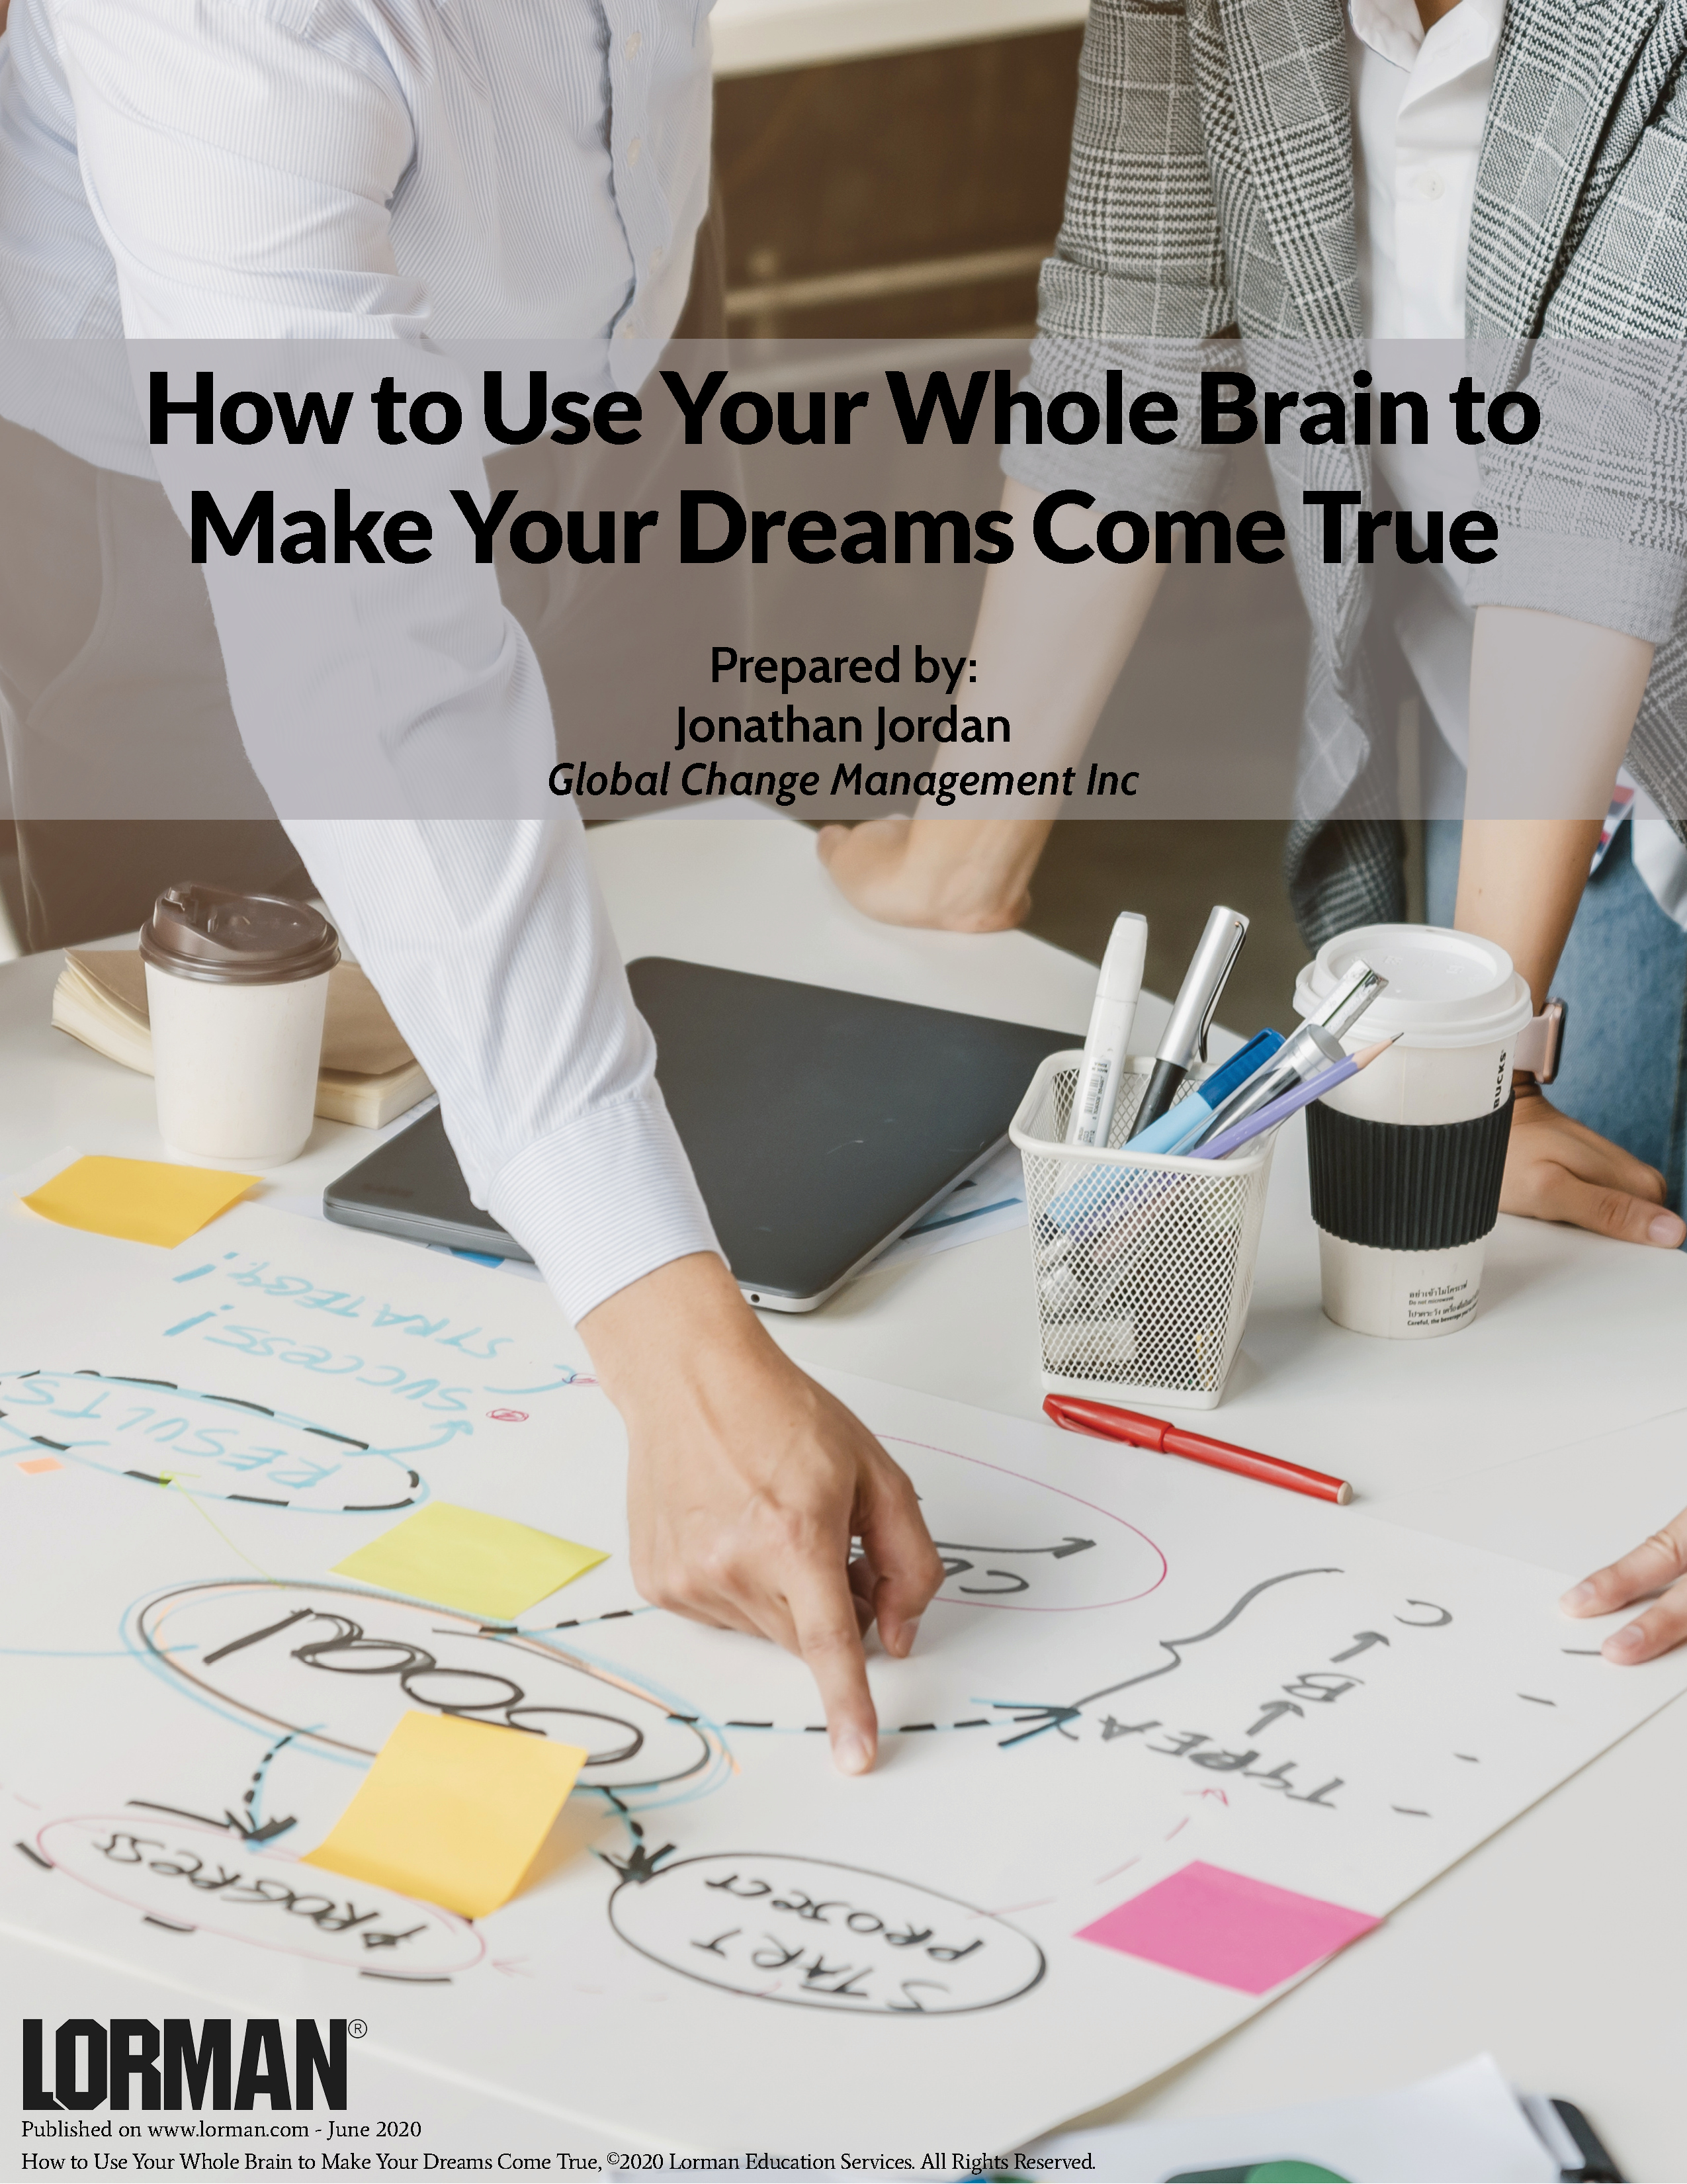 How to Use Your Whole Brain to Make Your Dreams Come True